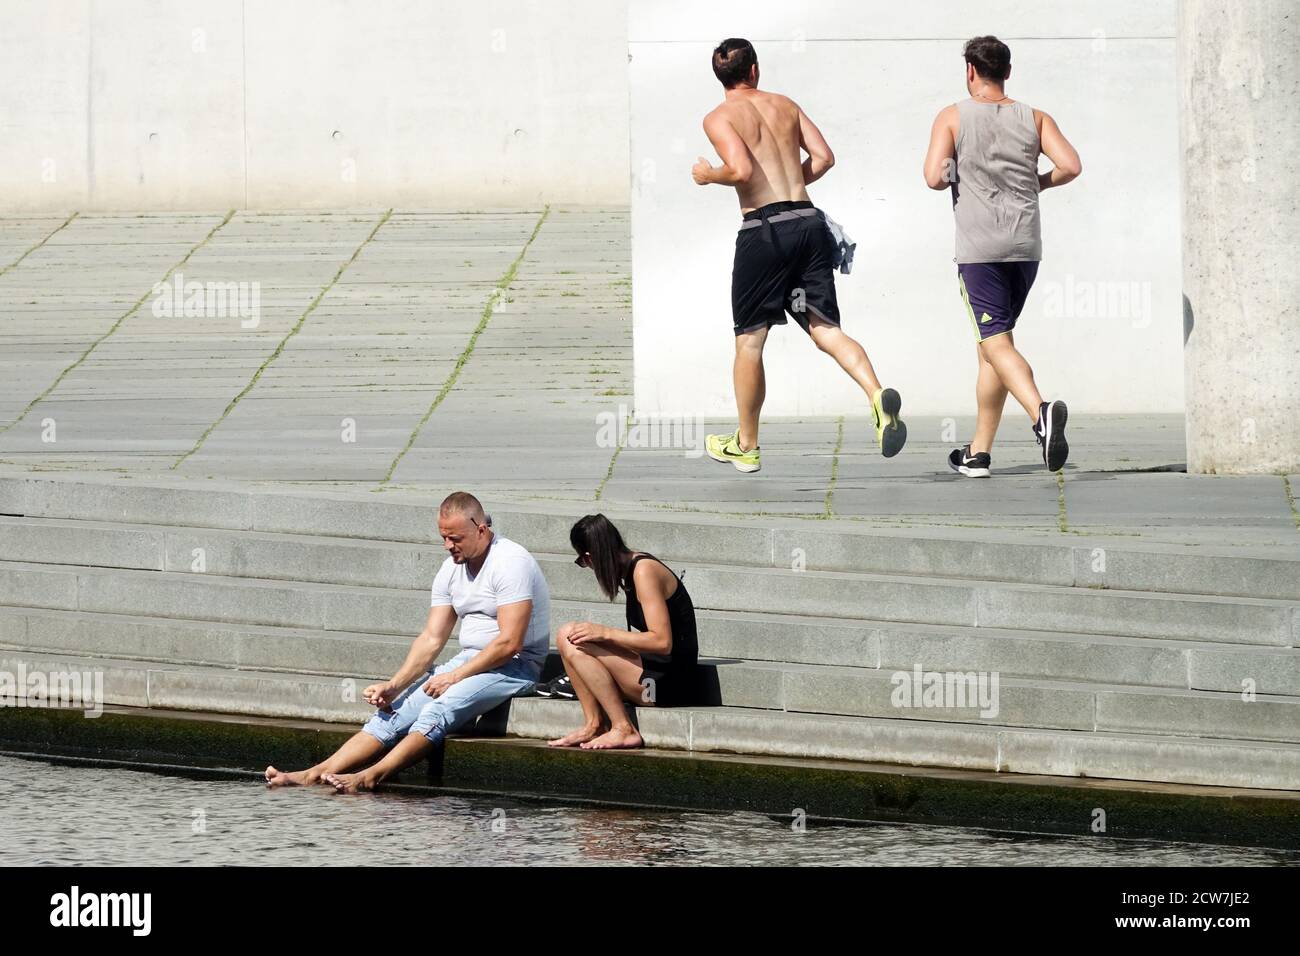 Berlin city life Couple on the banks of the Spree river riverside and in the background two men on the run Stock Photo